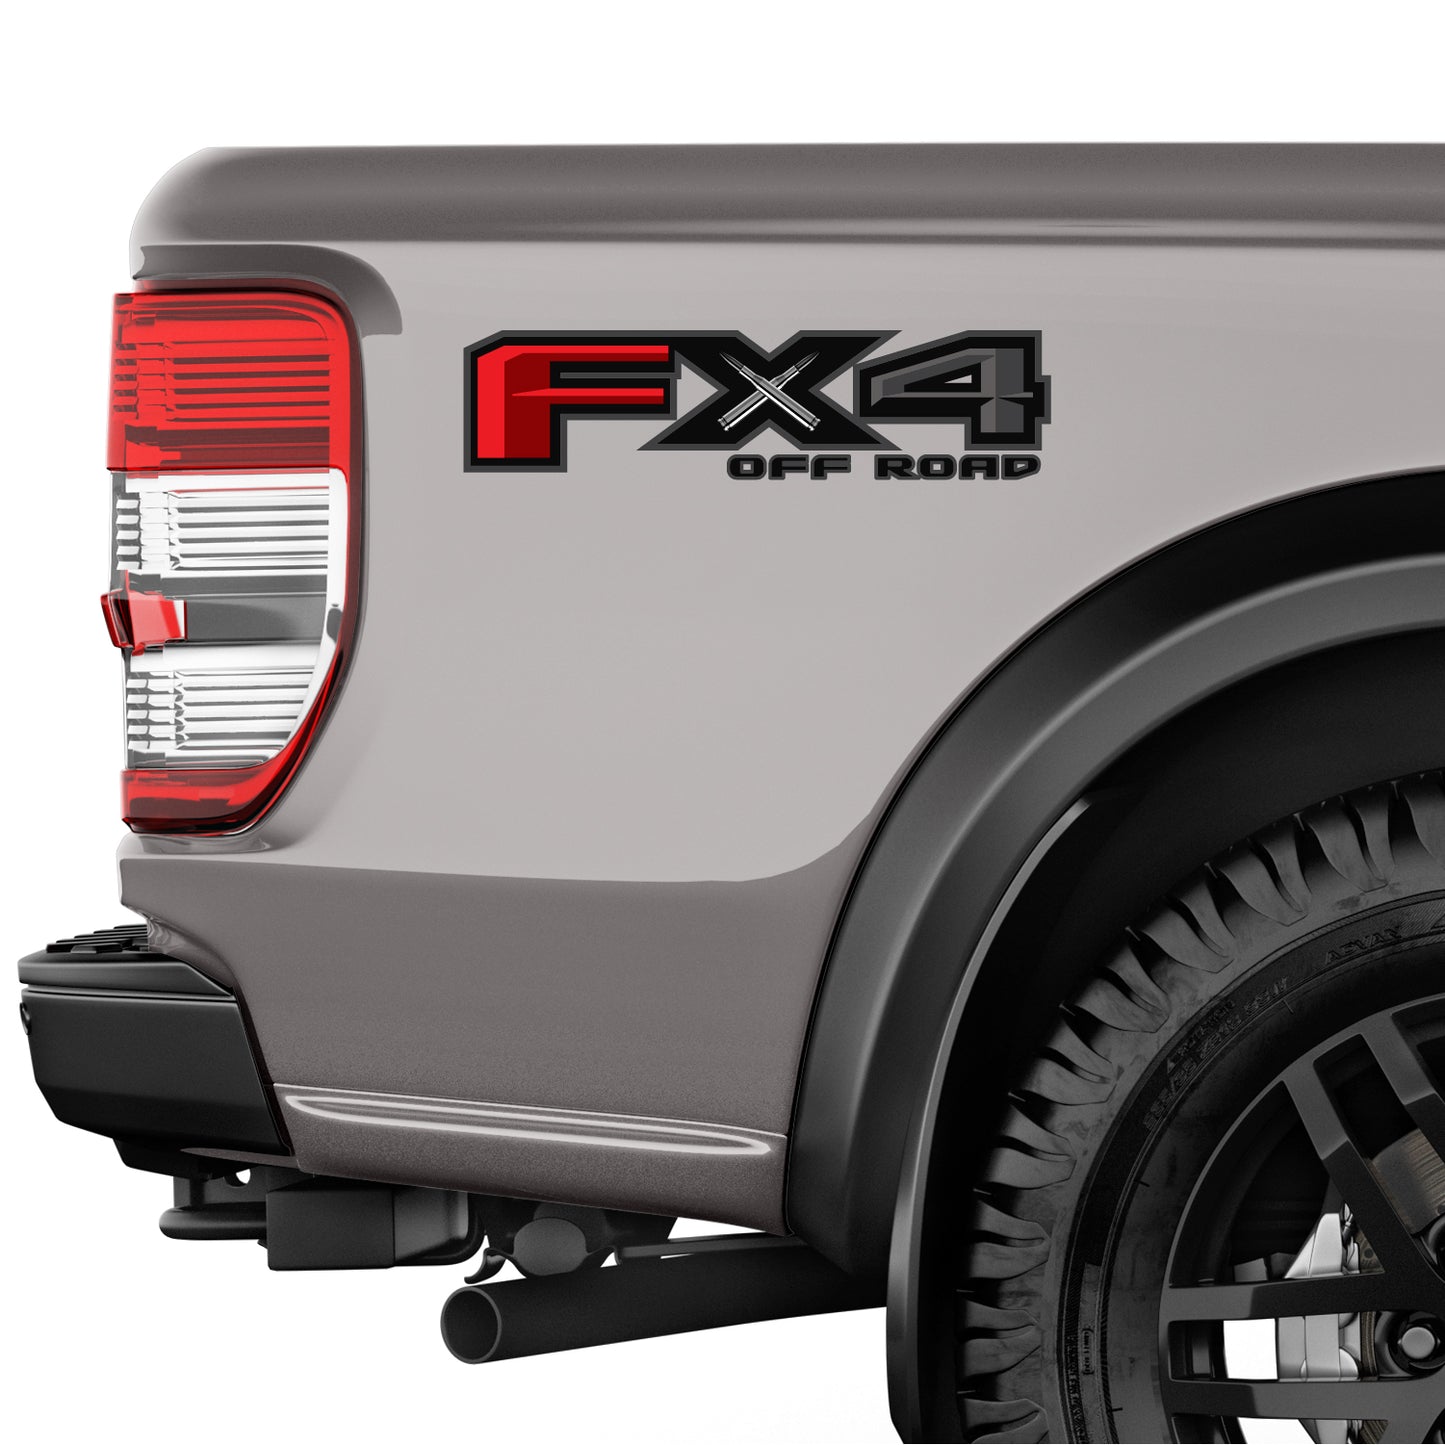 FX4 Off Road Bullets Decal Replacement Sticker Ford F 150 Bedside Emblem for 4x4 Truck Super Duty